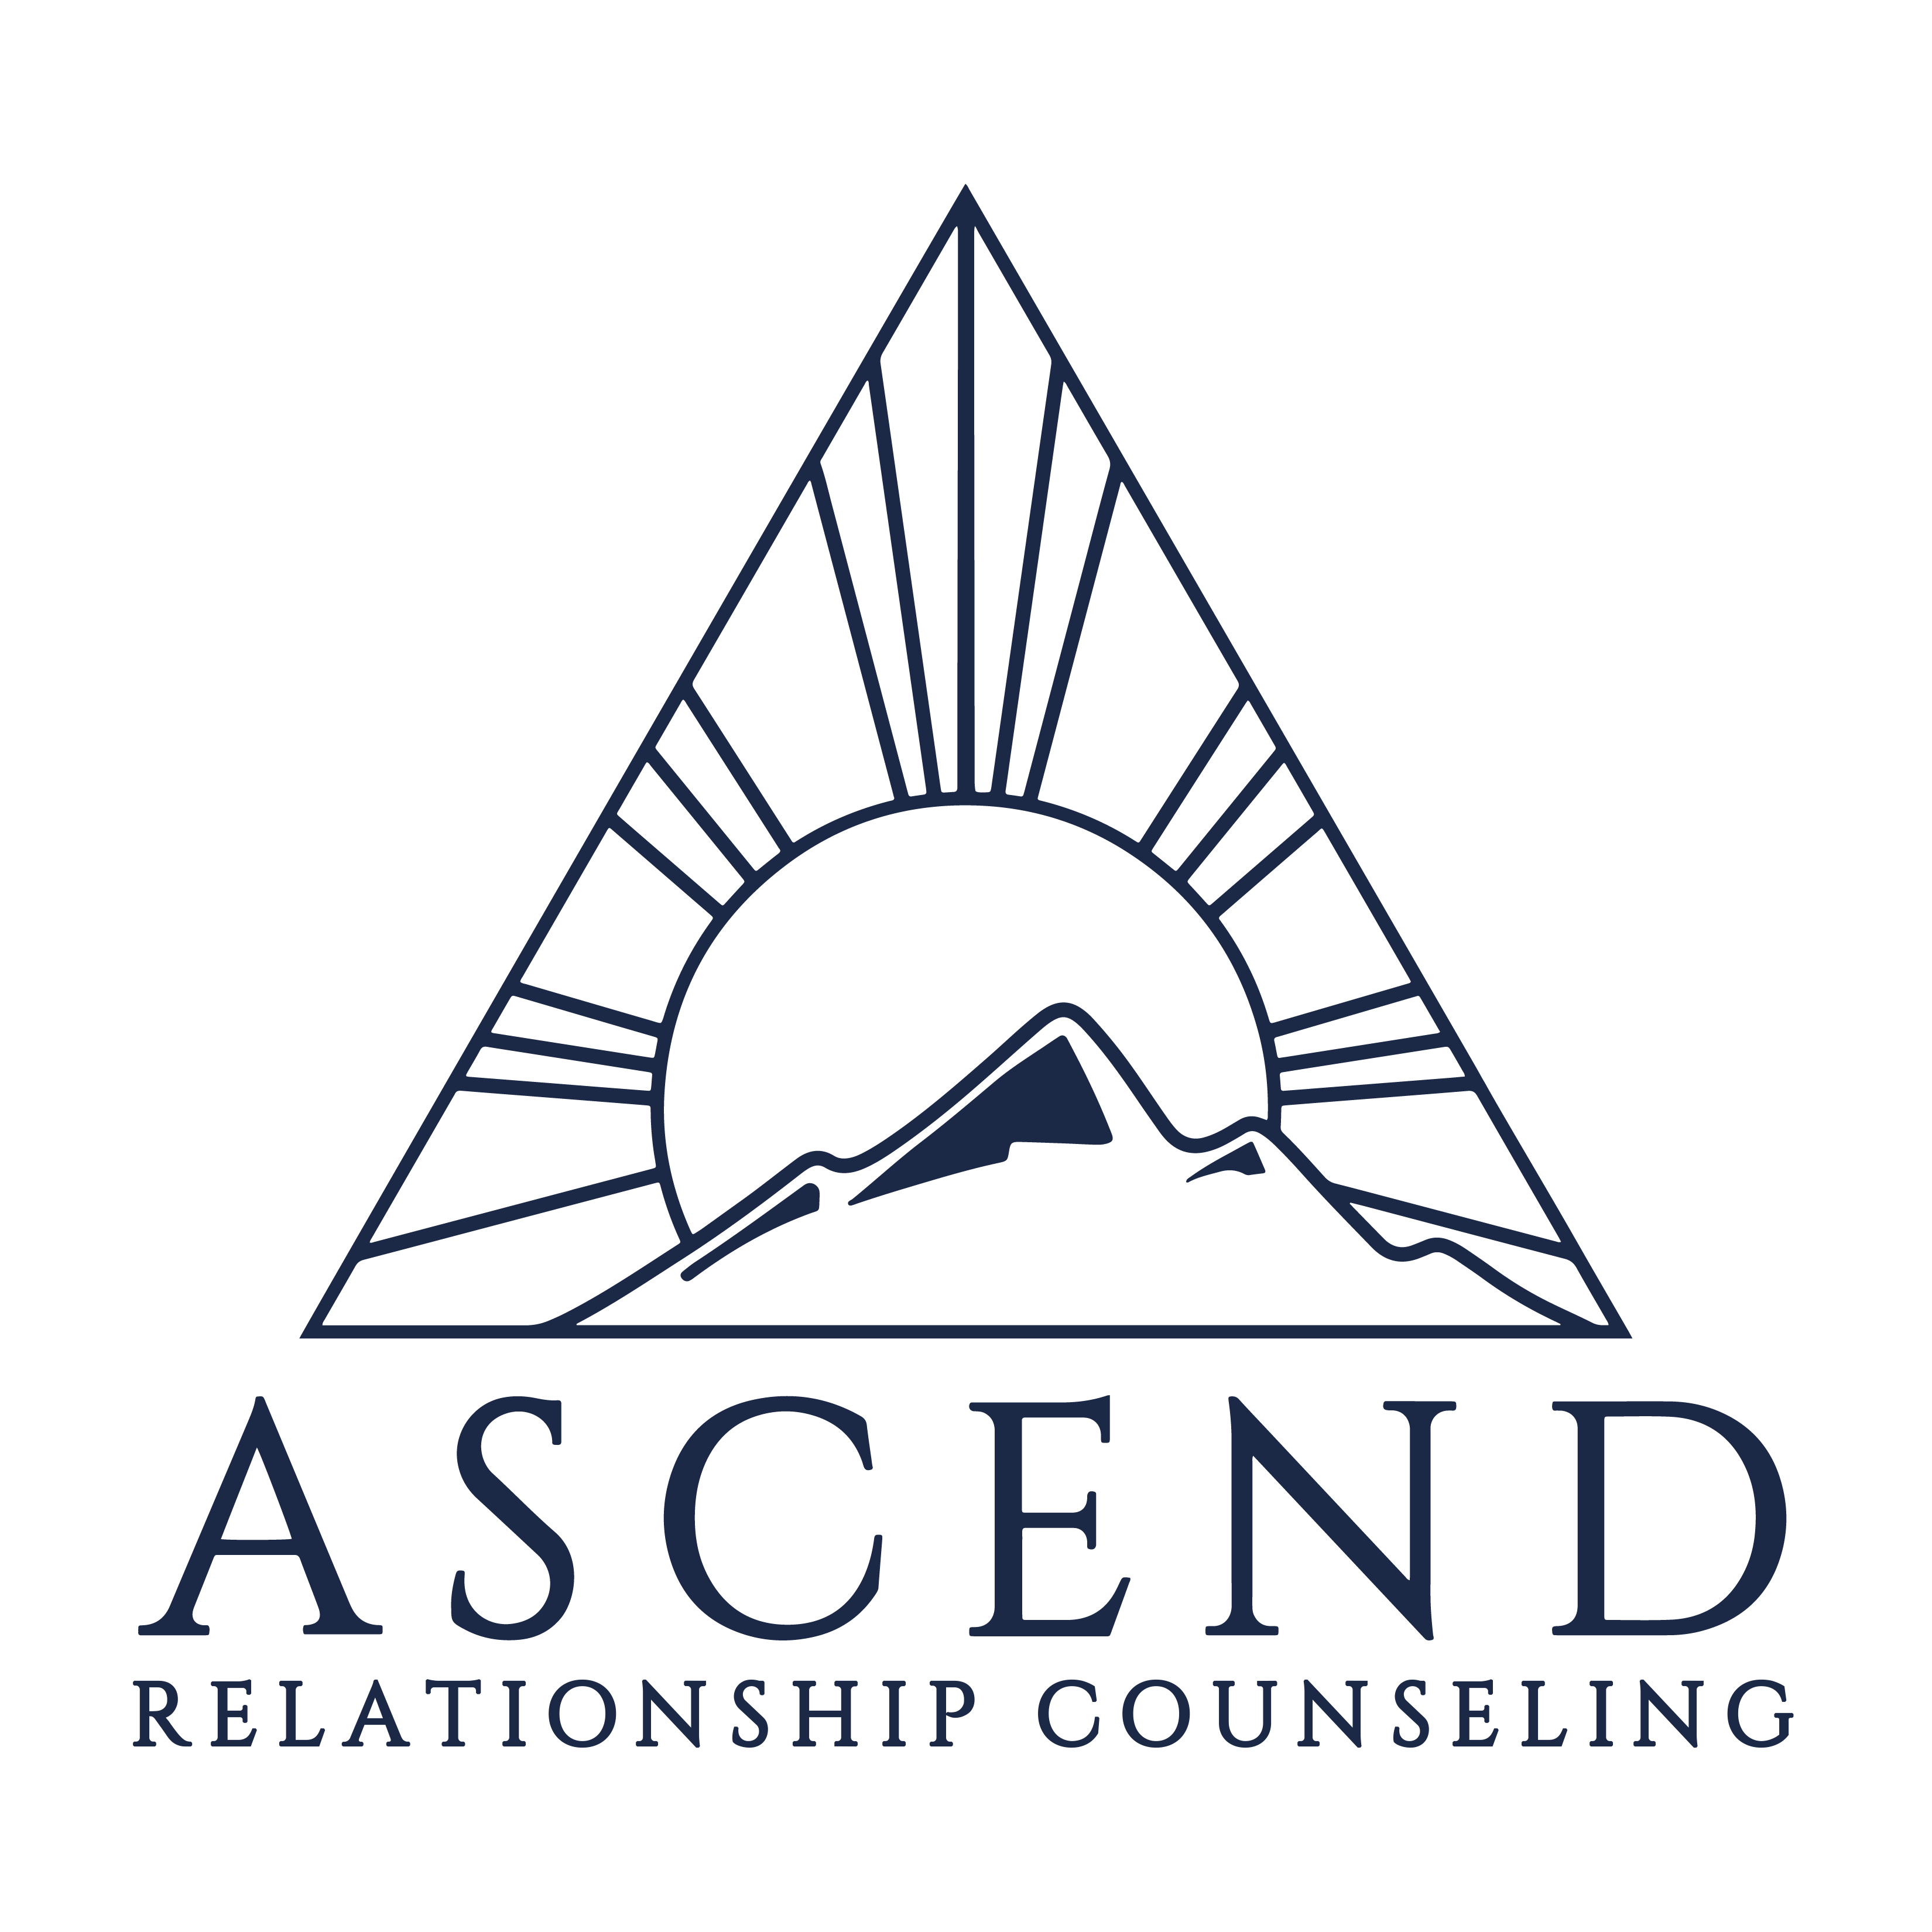 Ascend Relationship Counseling